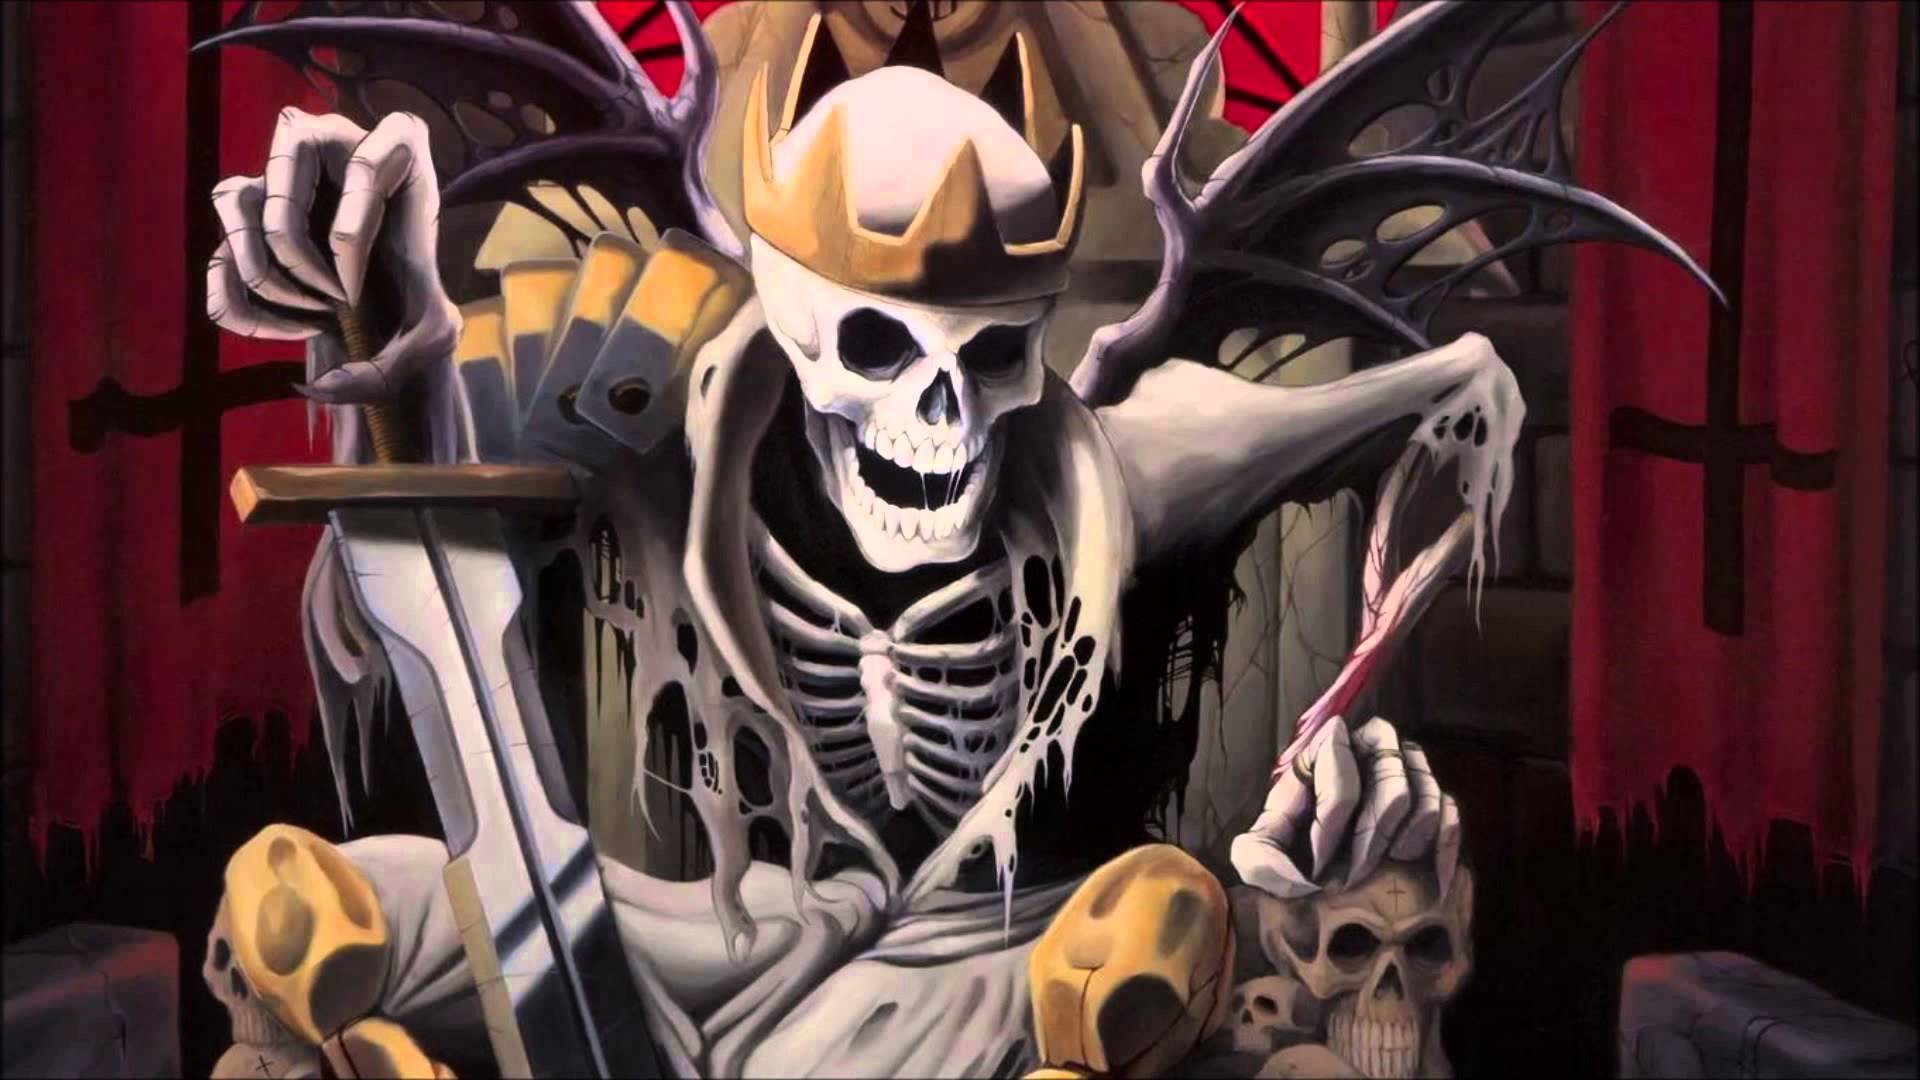 1920x1080 Hail To The King Deathbat A7x Wallpaper Hd Avenged Sevenfold Hail To The  King Song Preview